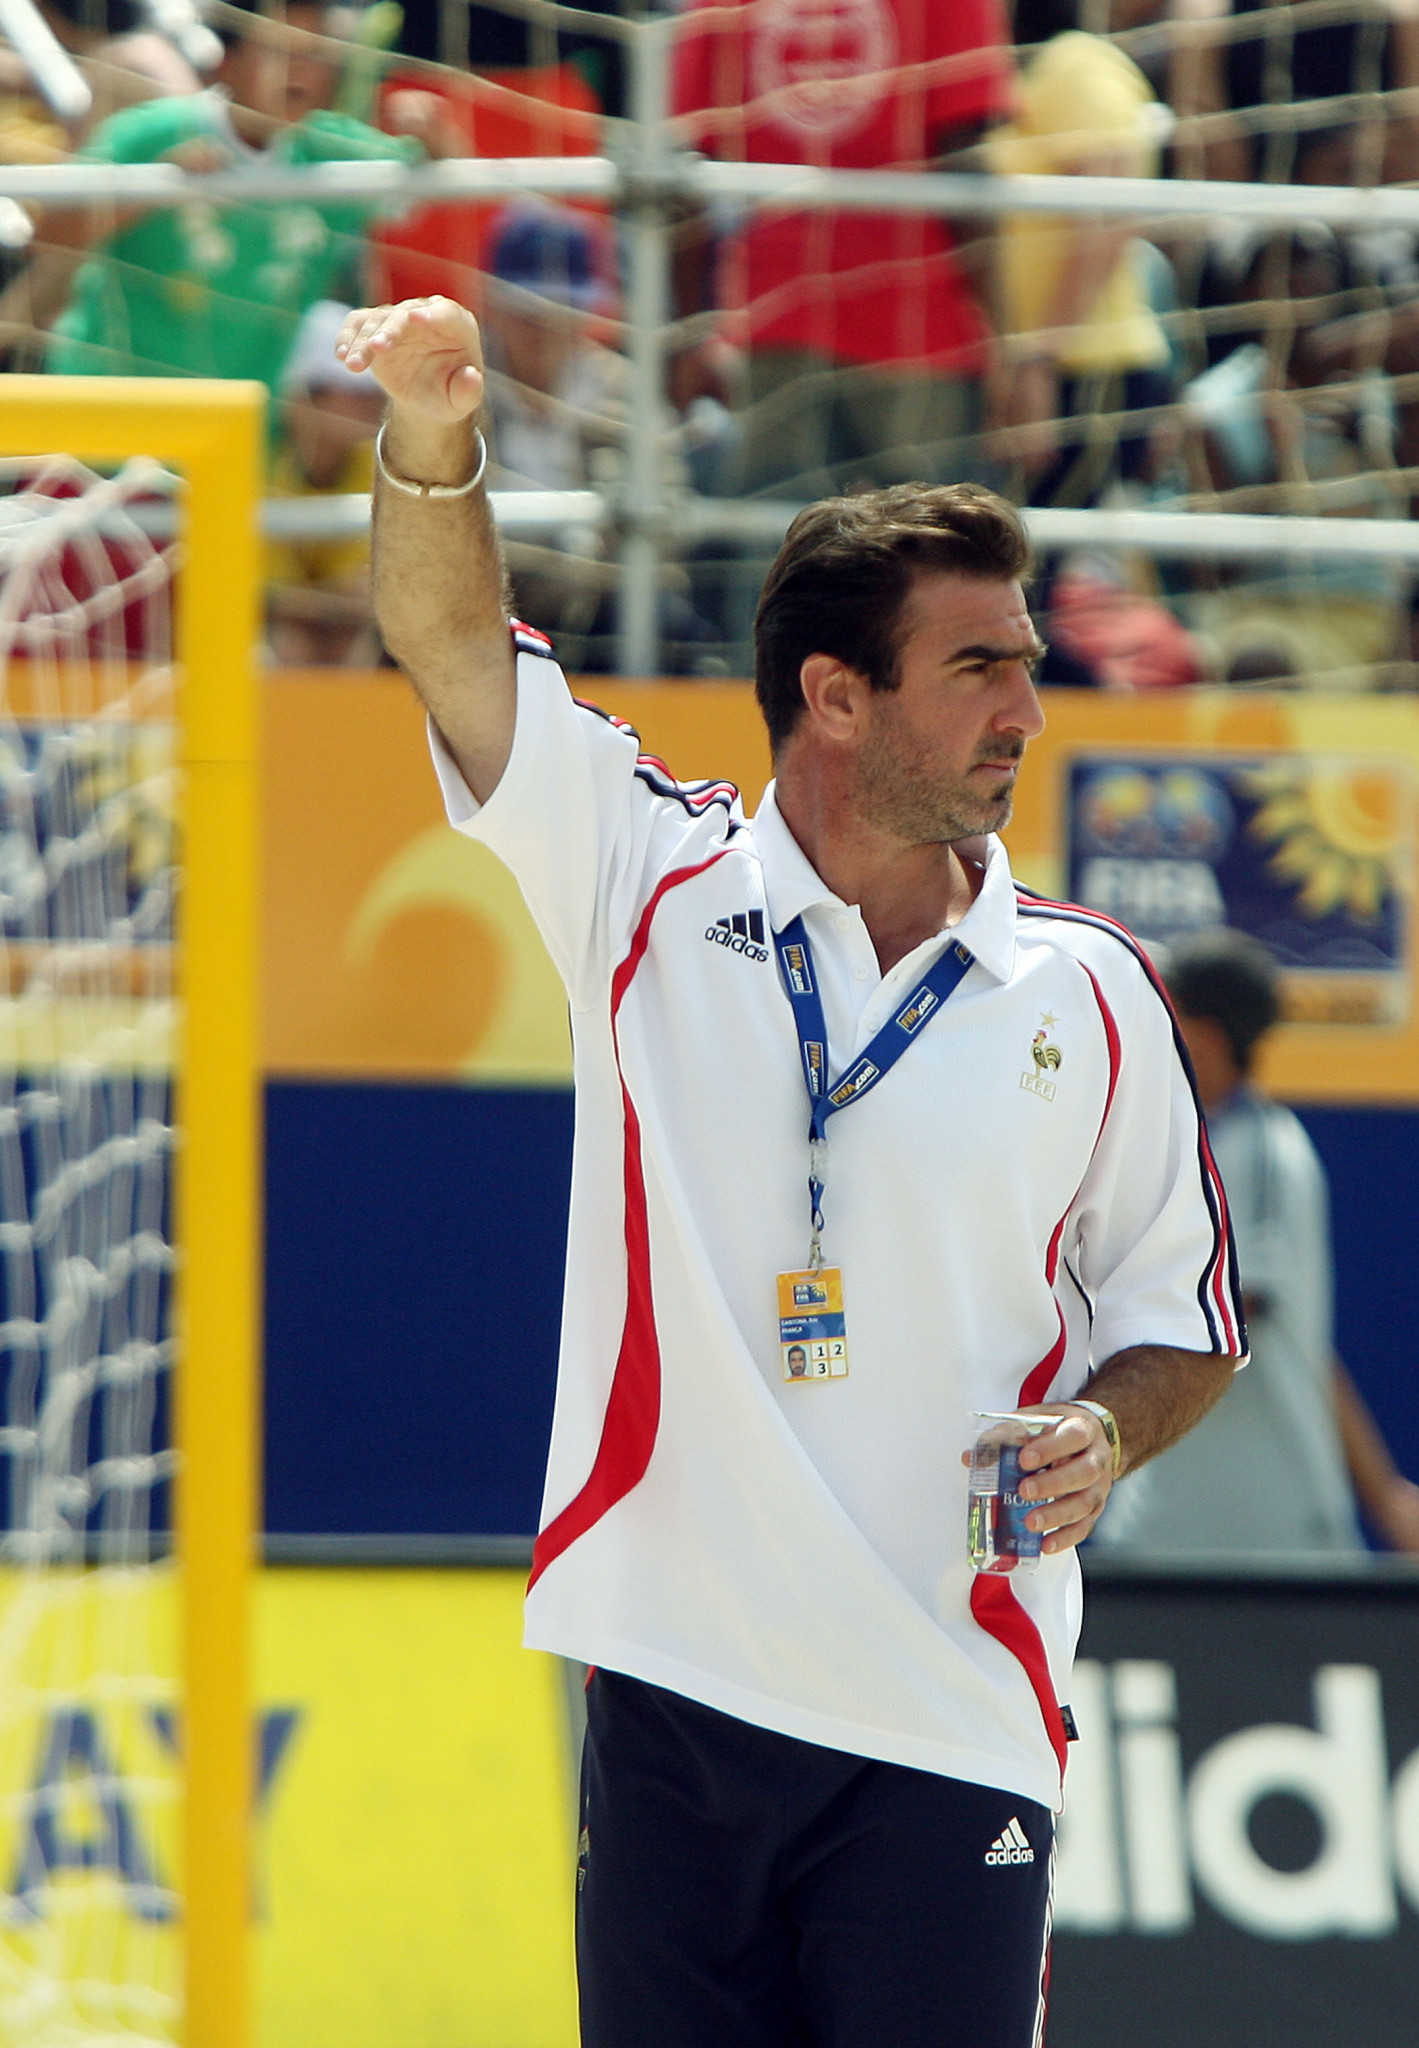 Former Manchester United star Eric Cantona was a highly successful beach soccer player and coach for 15 years after retiring from his main career, playing a key role in promoting the sport ©Getty Images